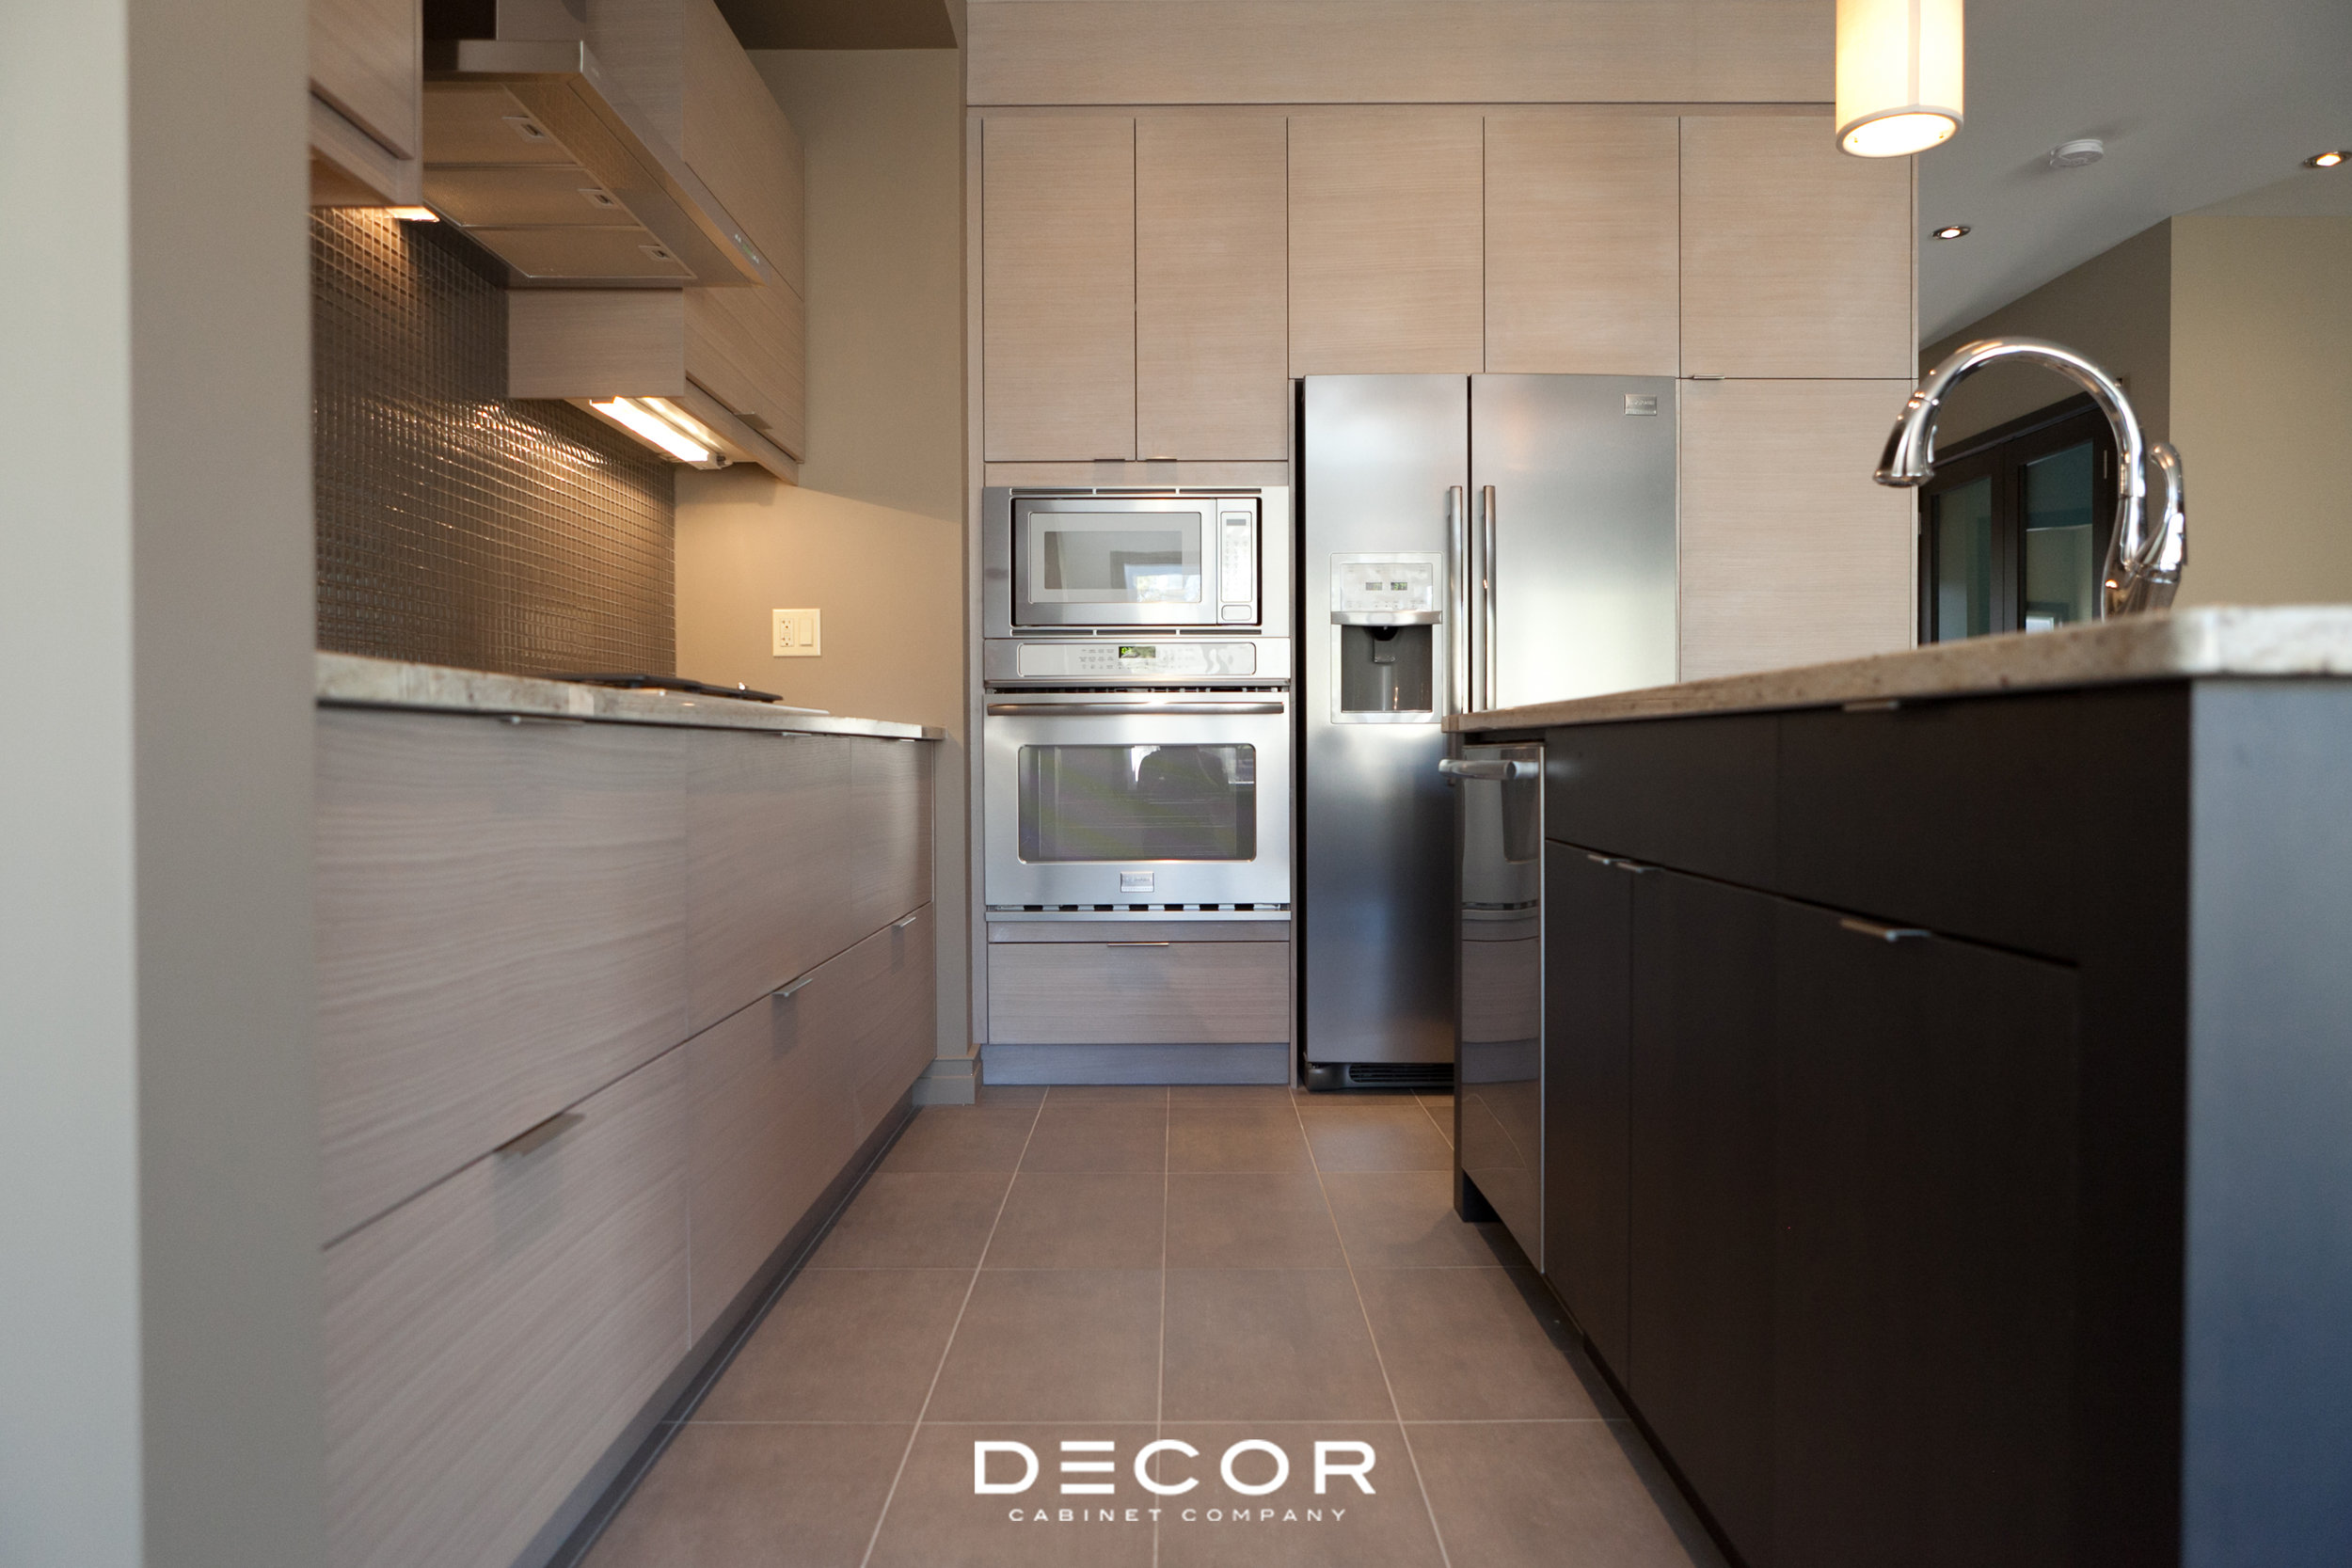 Decor Cabinet Company Kitchens By Lenore